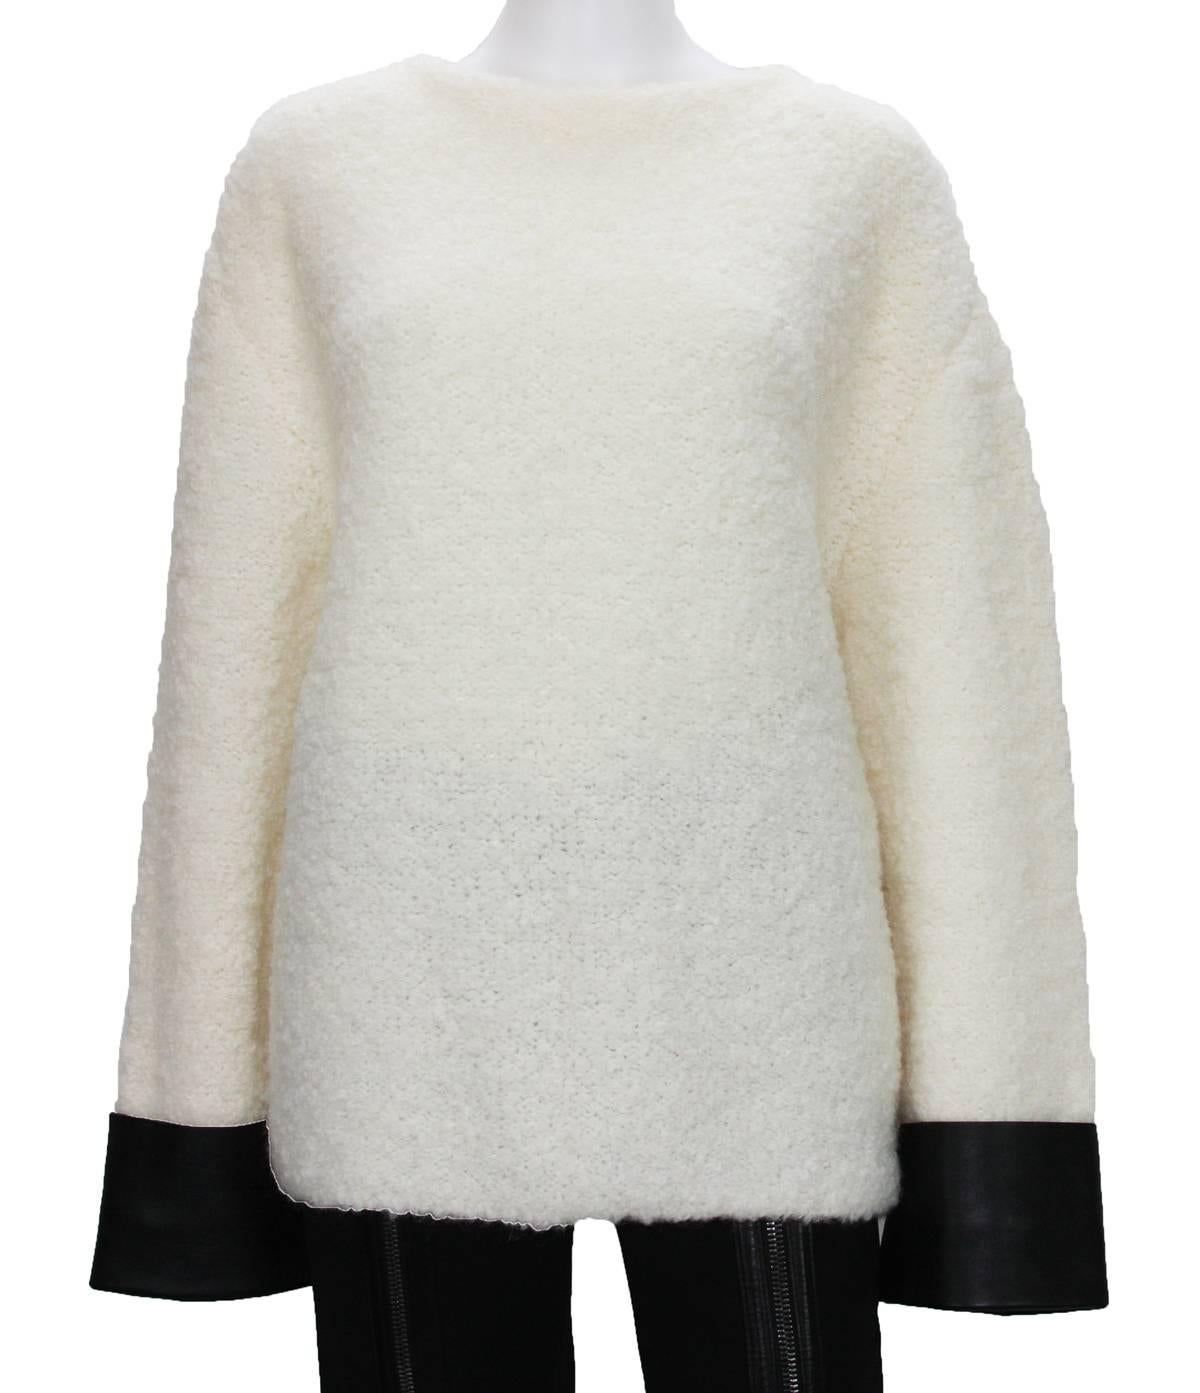 New GUCCI Boucle Wool Jumper Sweater with Leather Cuffs
Italian Size M
Standard Fit to Size, Designed for Oversize Fit (will fit size L also)
Colors – Cream and Black
61% Wool, 35% Alpaca, 4% Polyamide
Sleeve Cuffs – 100% Leather
Oversize Fit, Boat